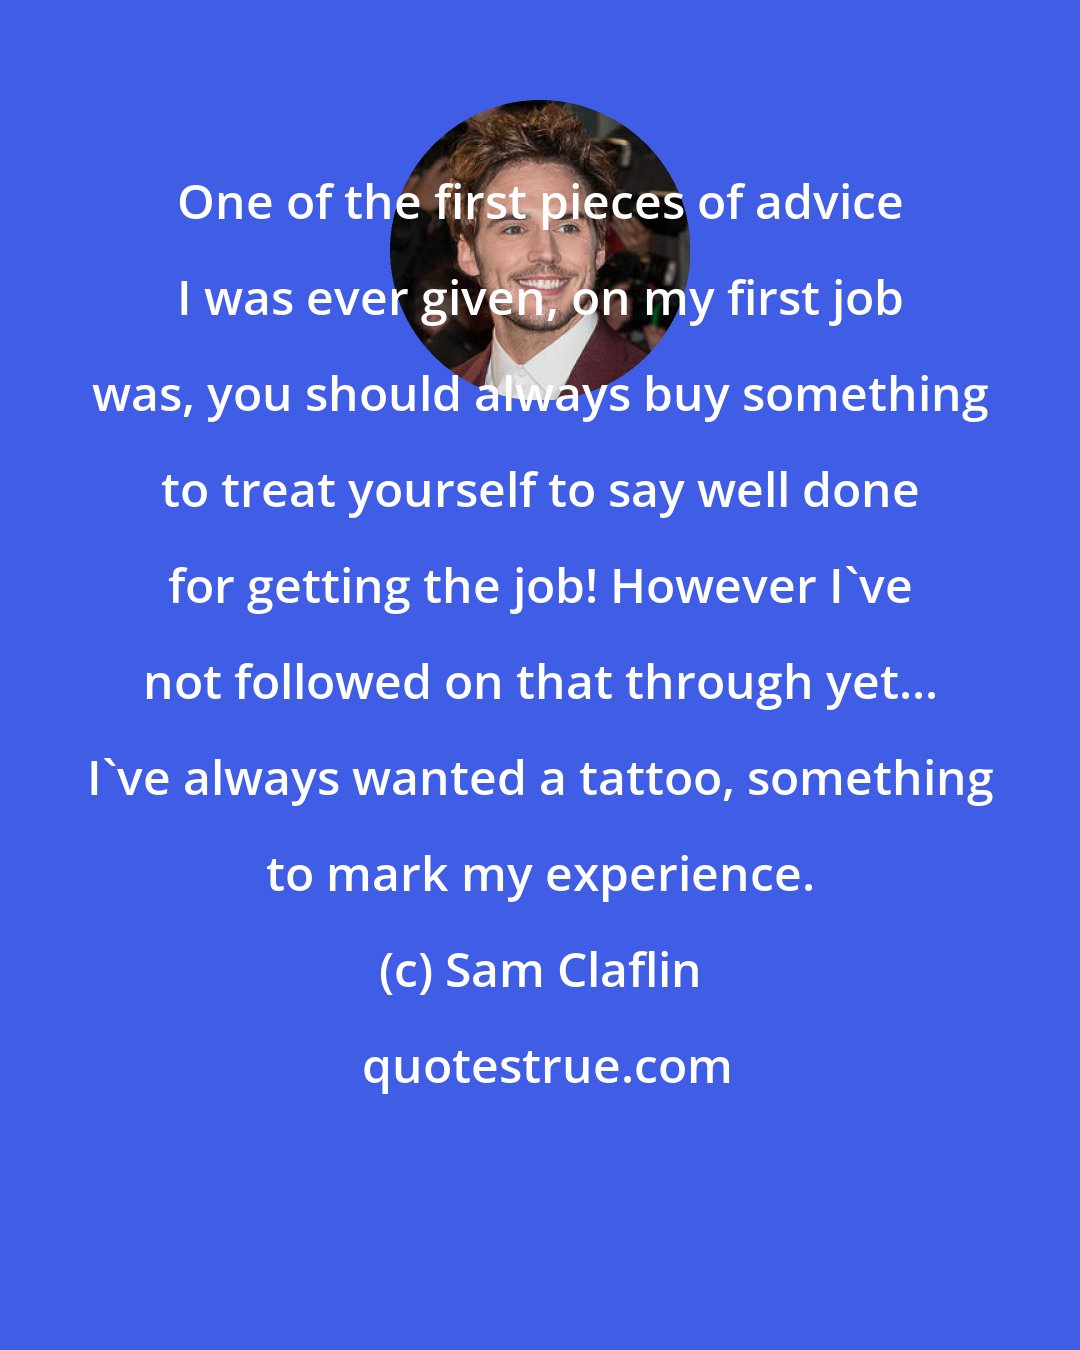 Sam Claflin: One of the first pieces of advice I was ever given, on my first job was, you should always buy something to treat yourself to say well done for getting the job! However I've not followed on that through yet... I've always wanted a tattoo, something to mark my experience.